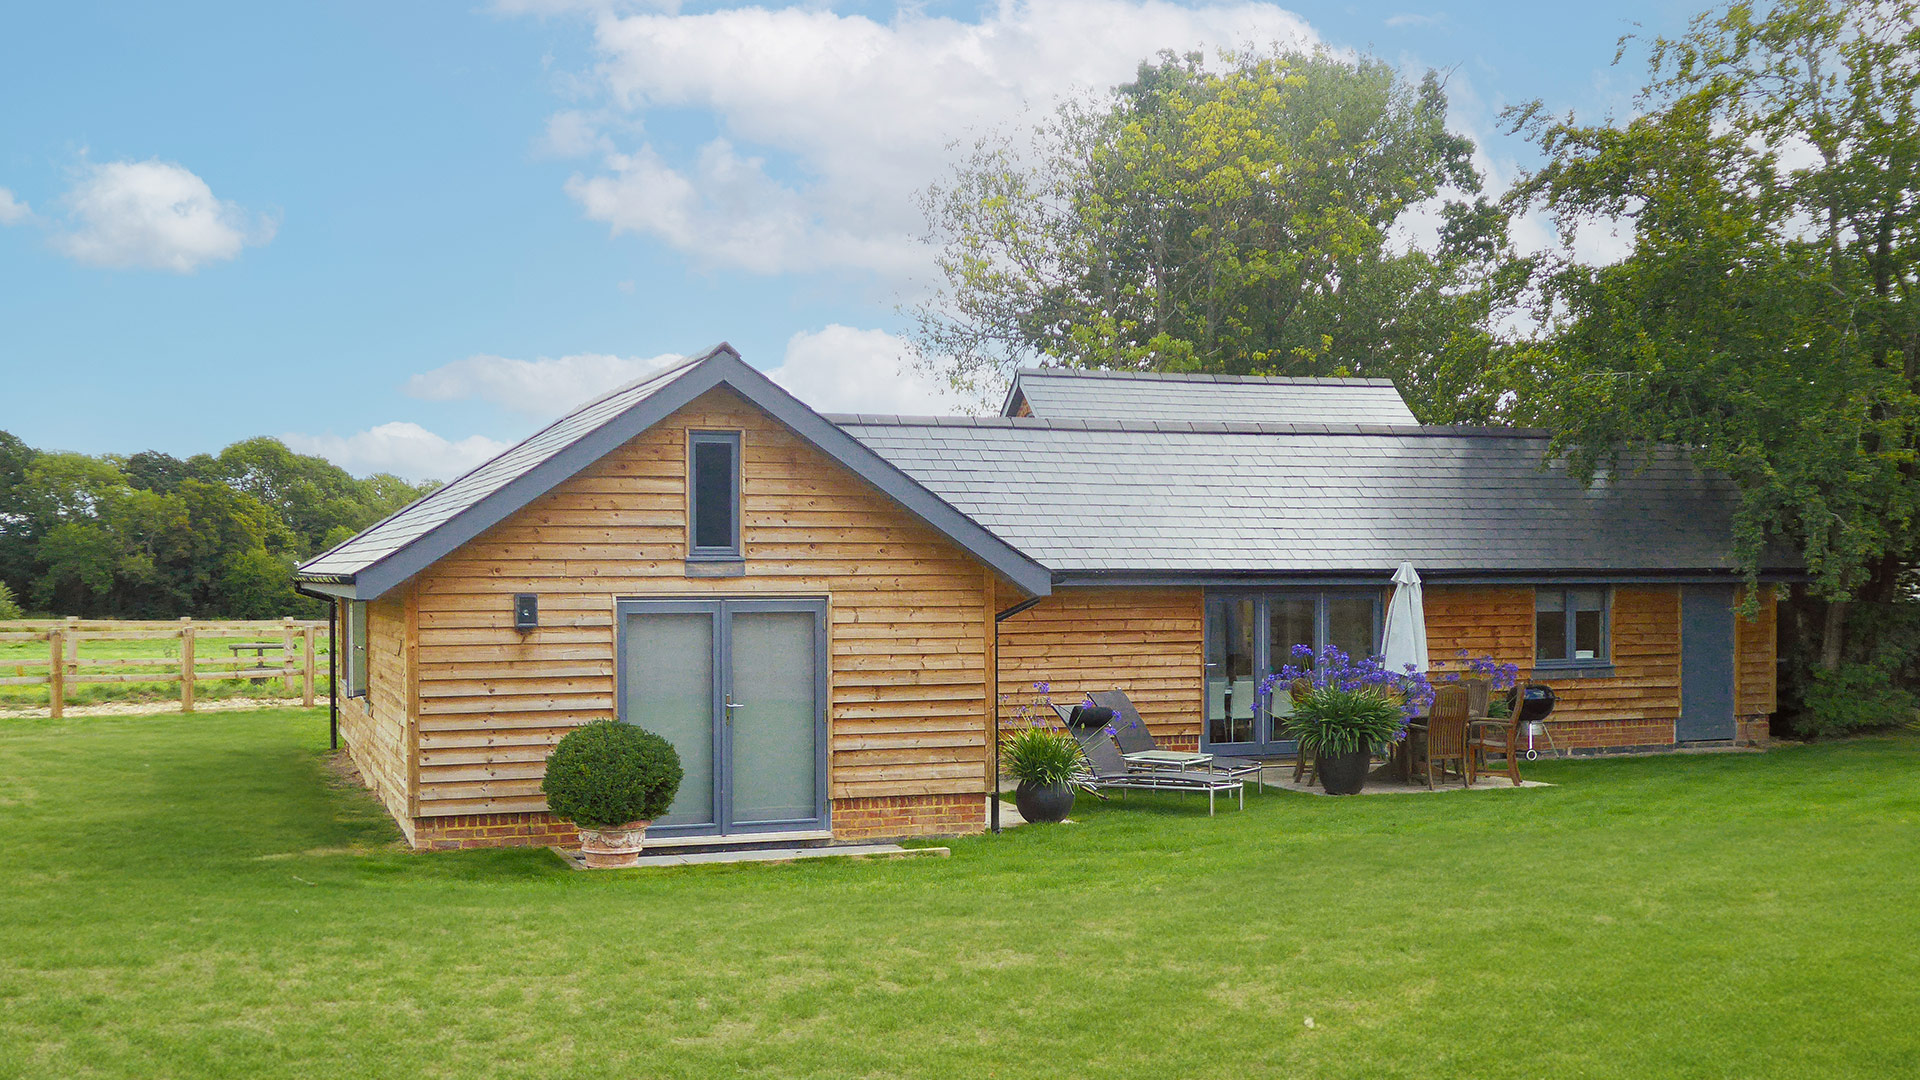 Class Q barn conversion with timber cladding